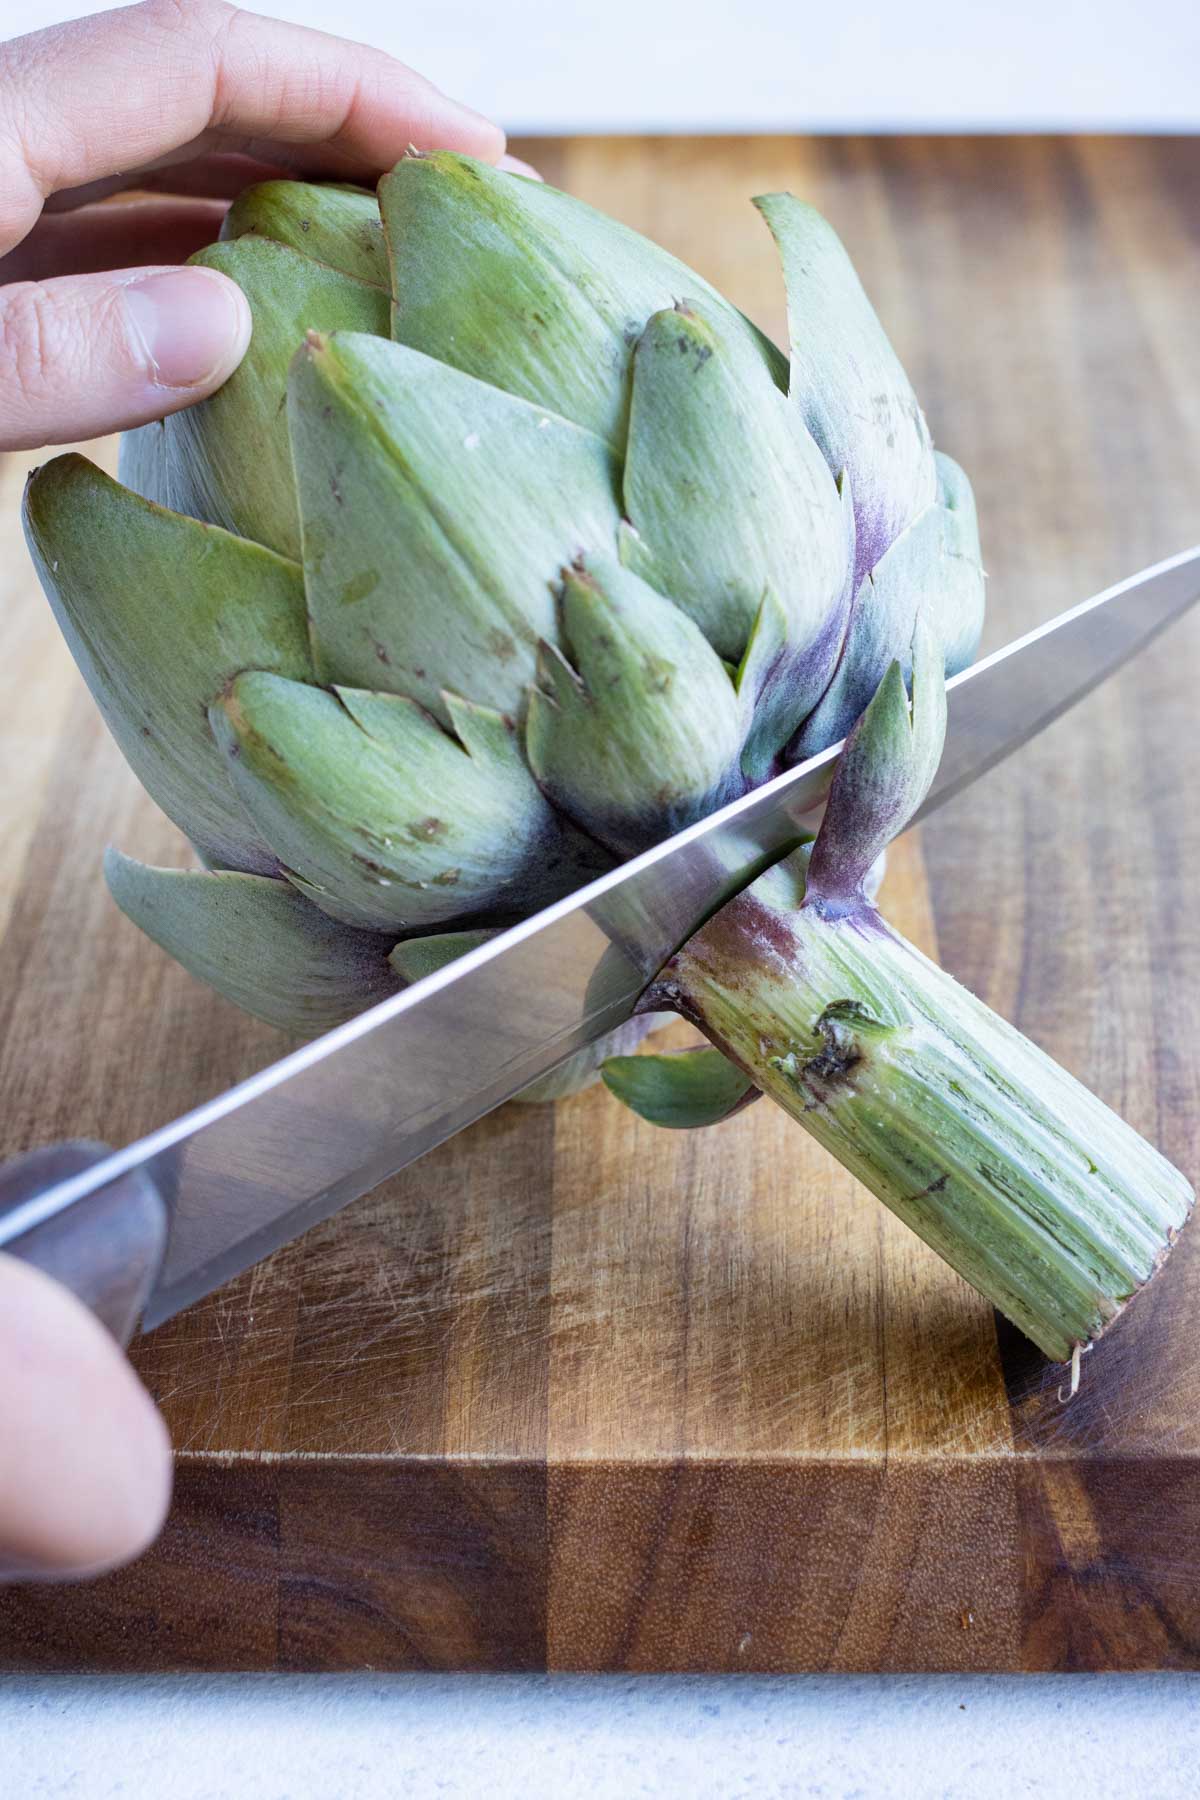 The stem is trimmed from the artichoke.